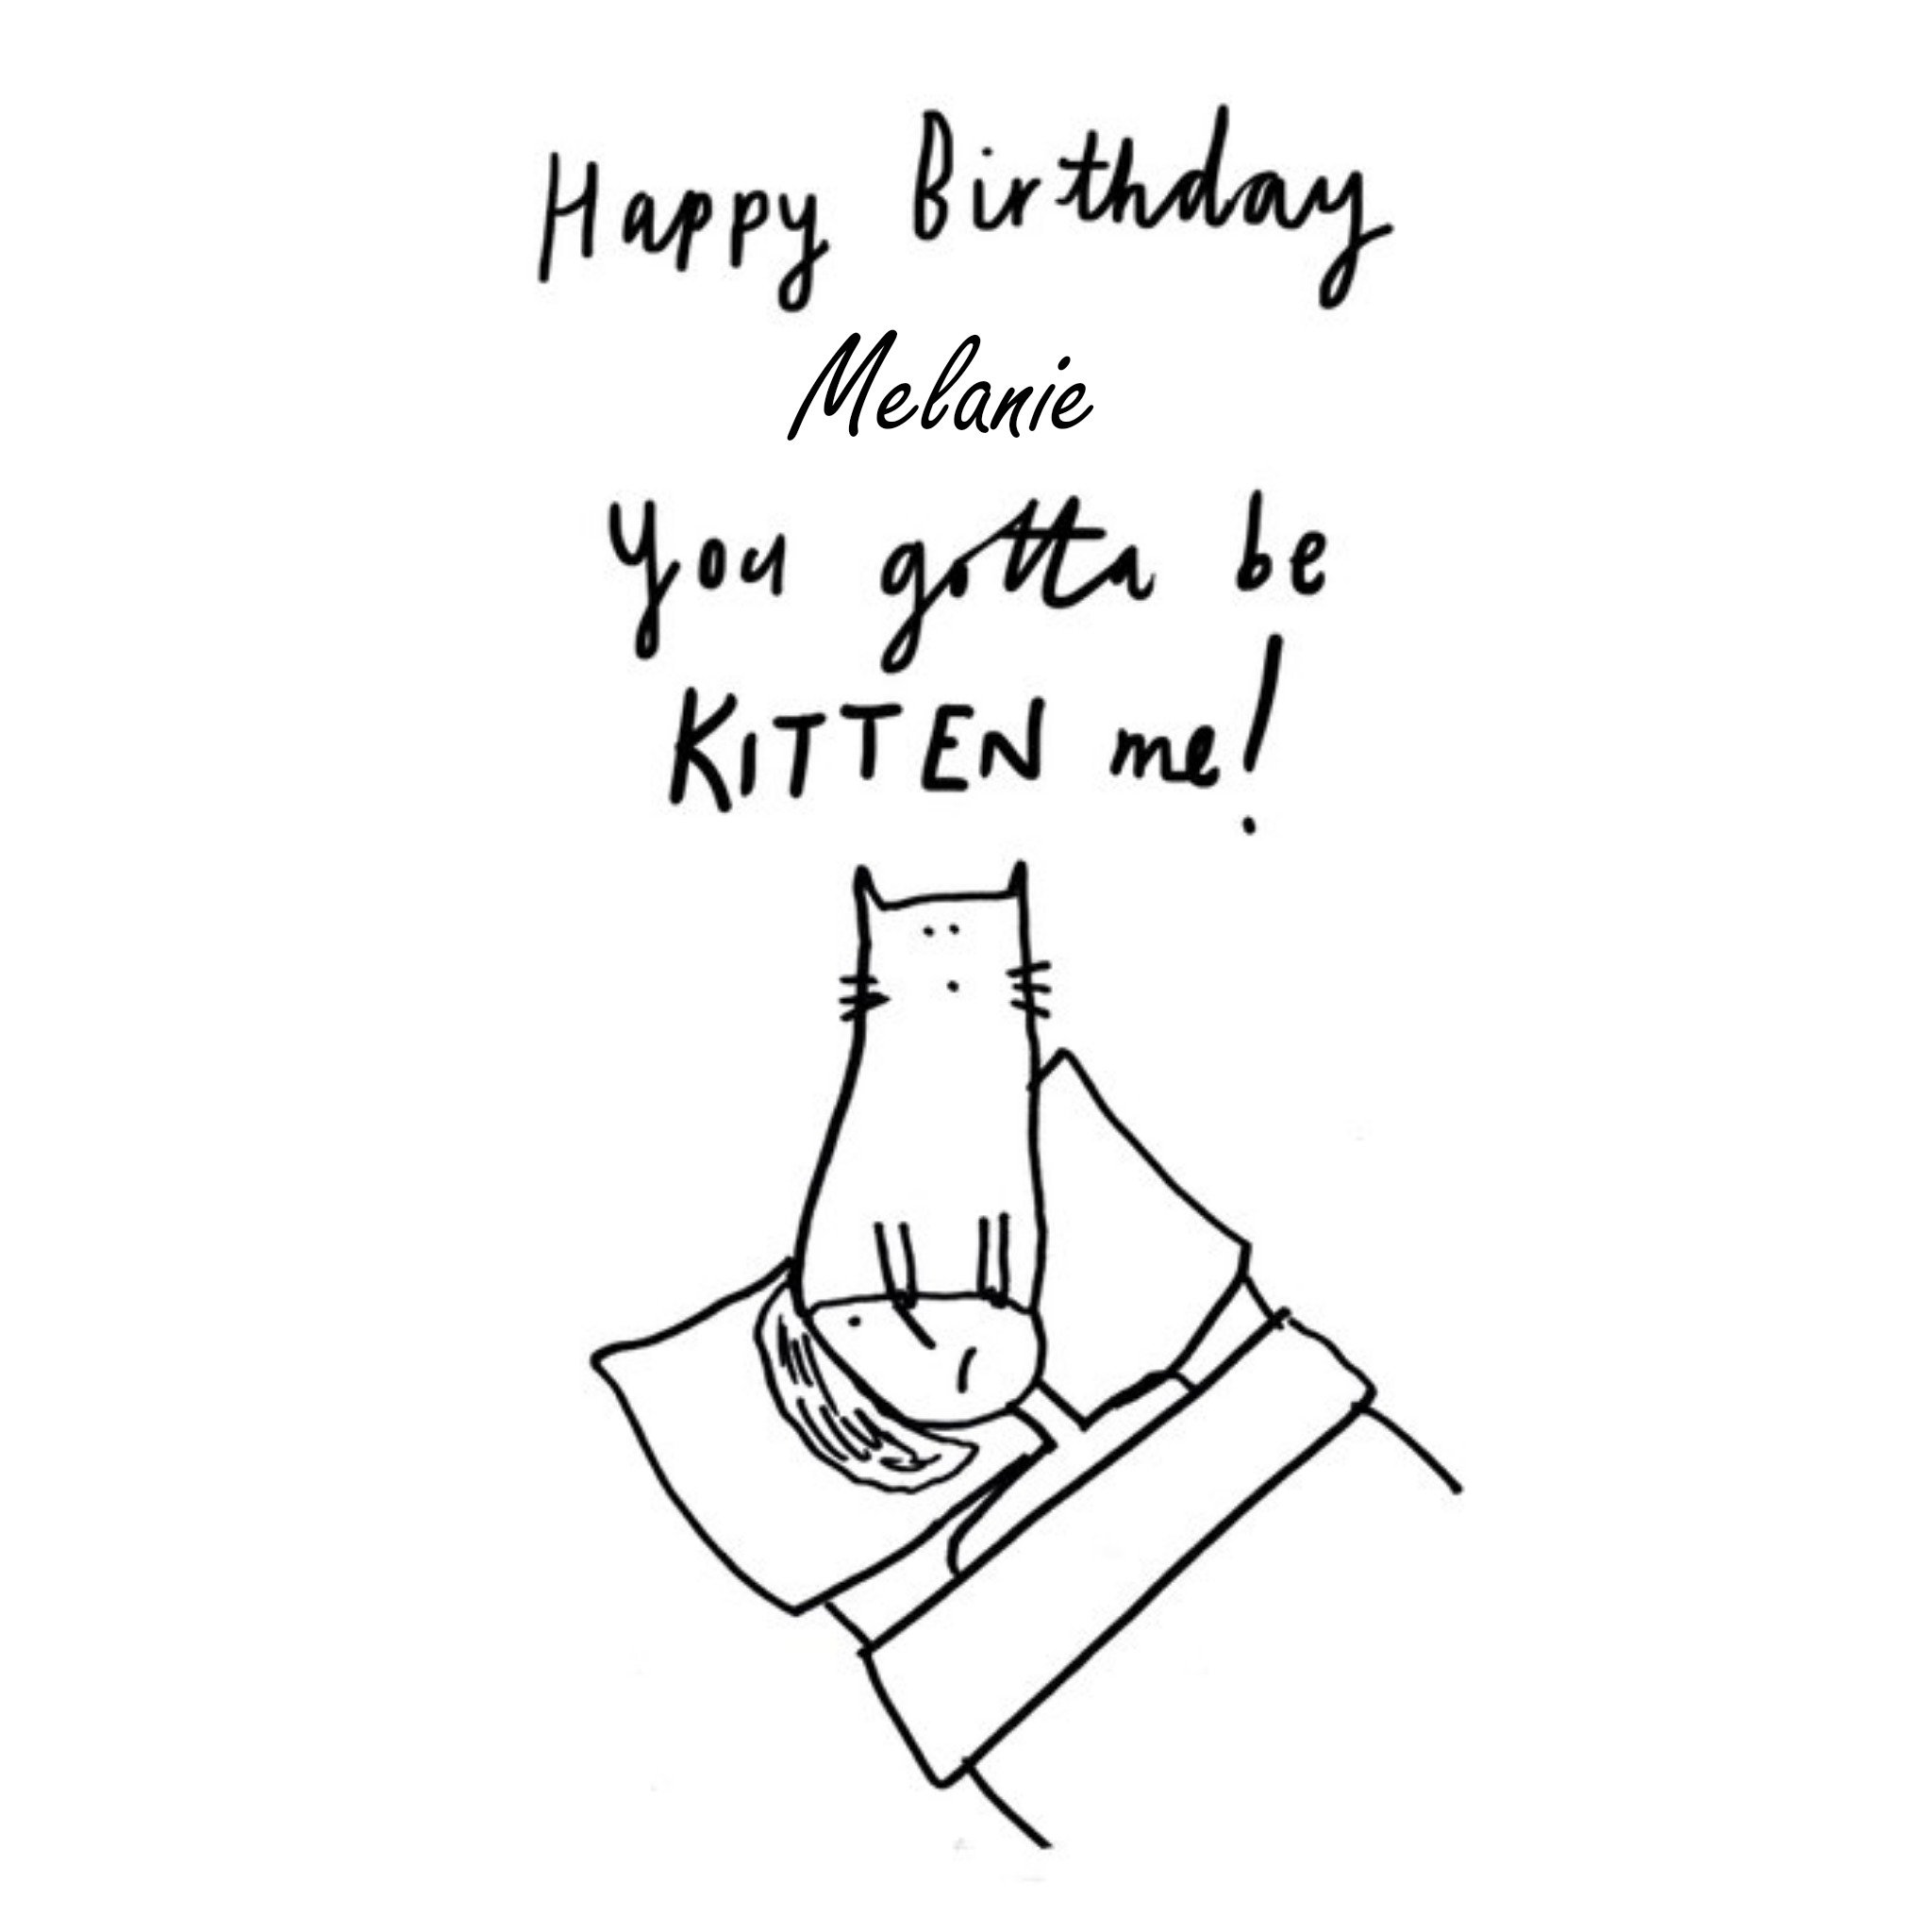 Moonpig You Gotta Be Kitten Me Personalised Happy Birthday Card, Square